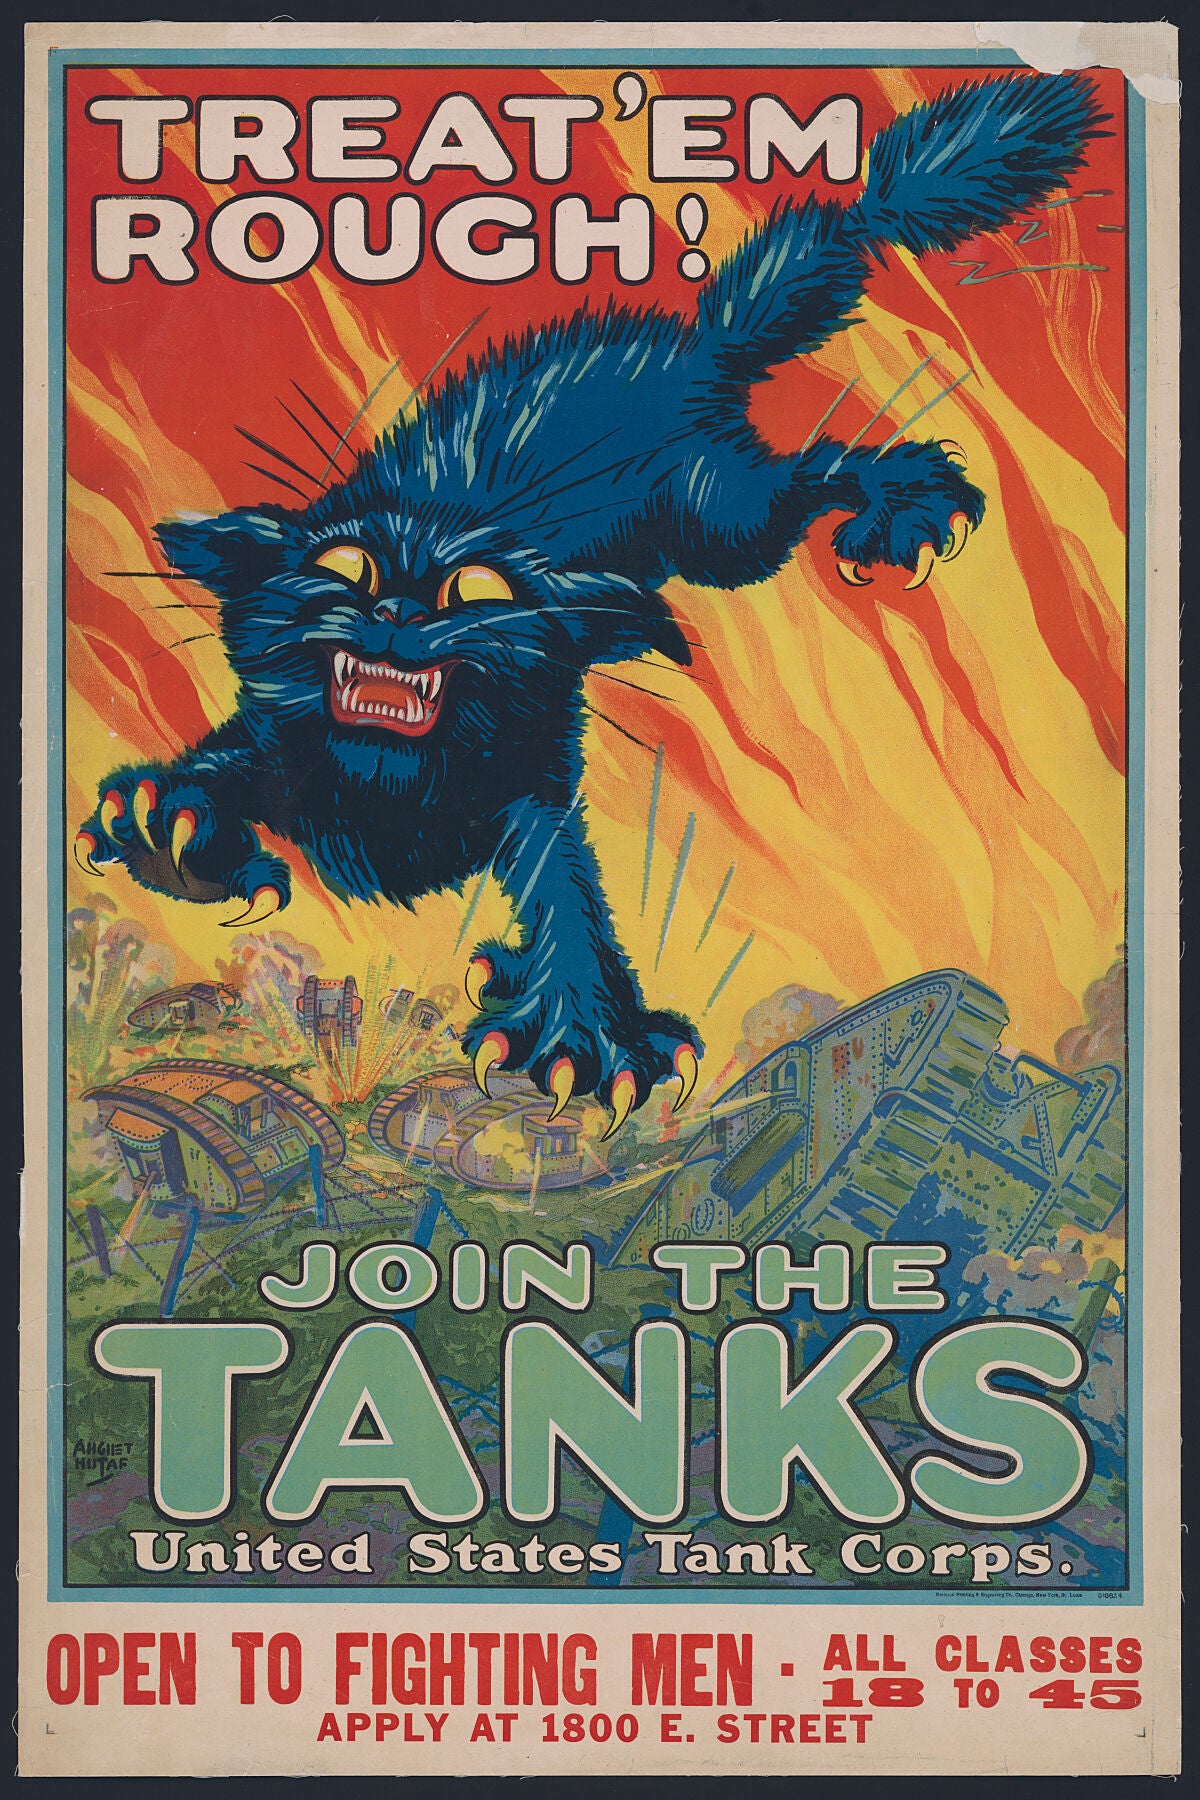 Treat 'em rough - Join the tanks United States Tank Corps by August William Hutaf - 1917